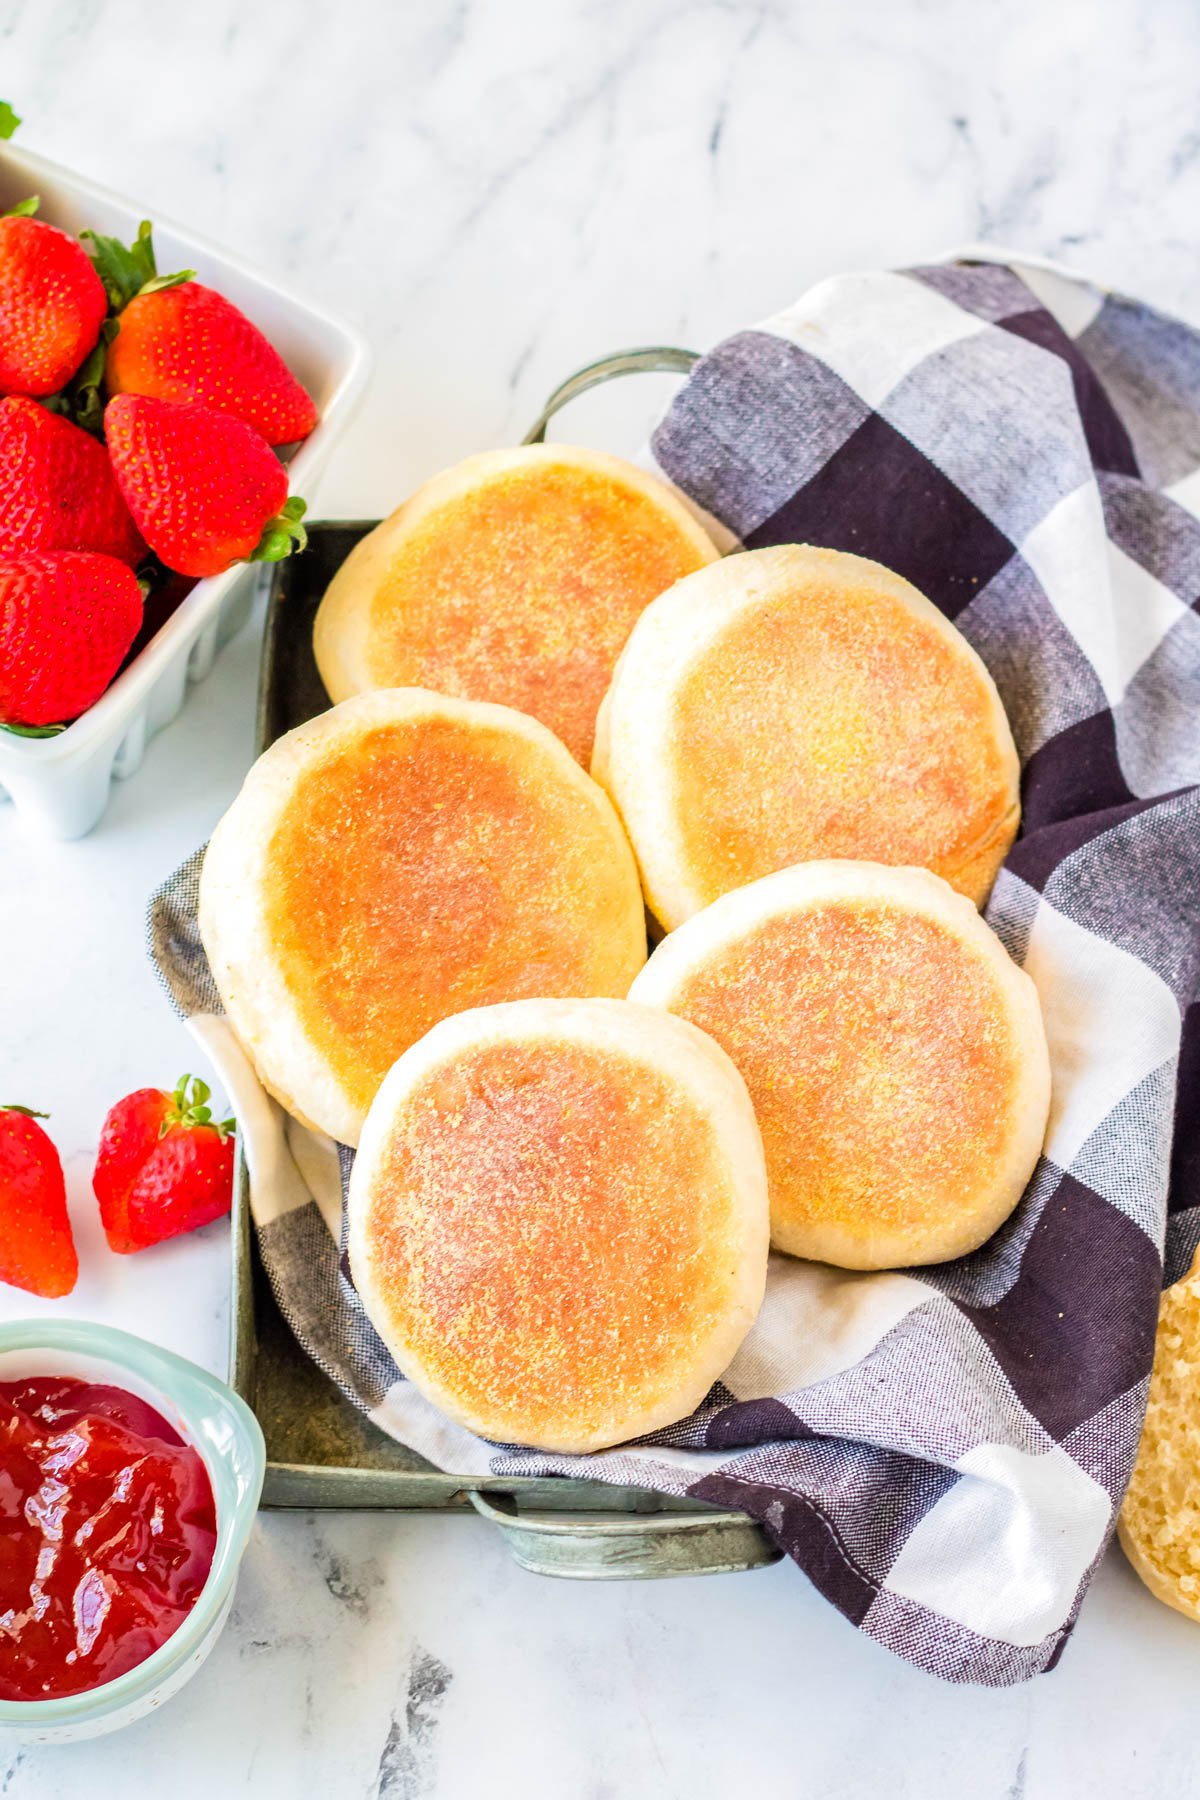 A basketful of 5 finished Homemade English Muffins with jam and butter nearby.